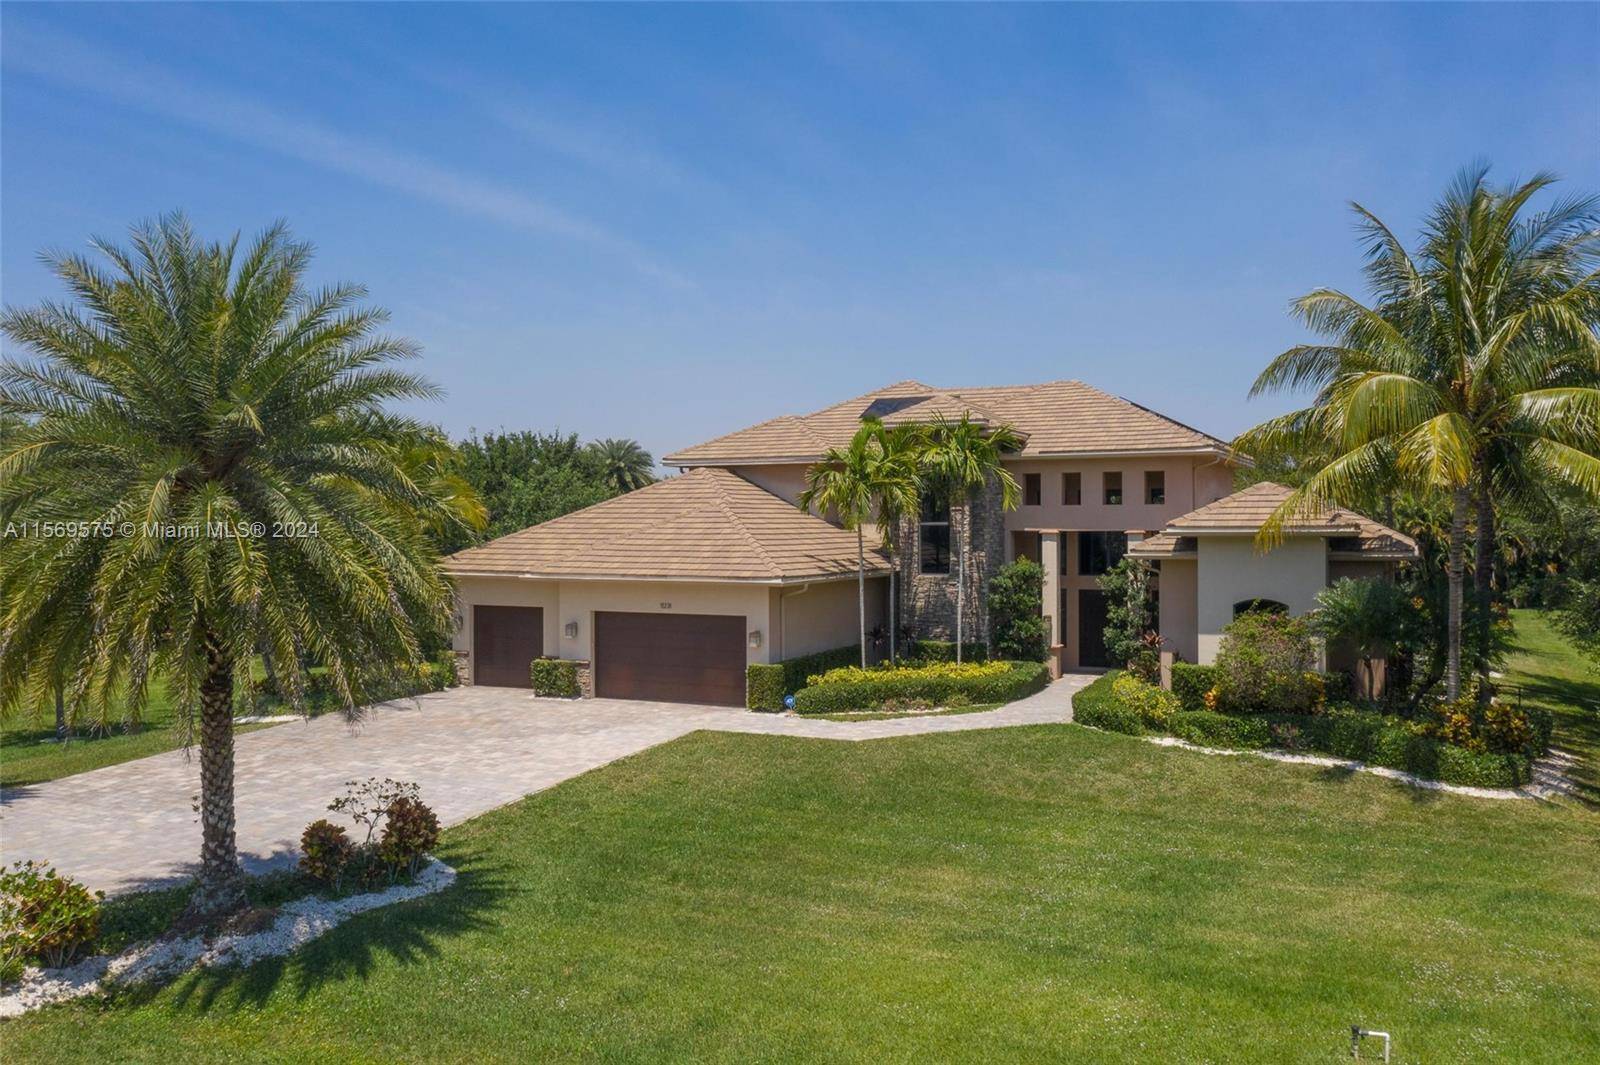 Welcome to the prestigious Plantation Acres where this AMAZING pool house of 5 bedroom, 5 bathroom office is sitting on a 1.